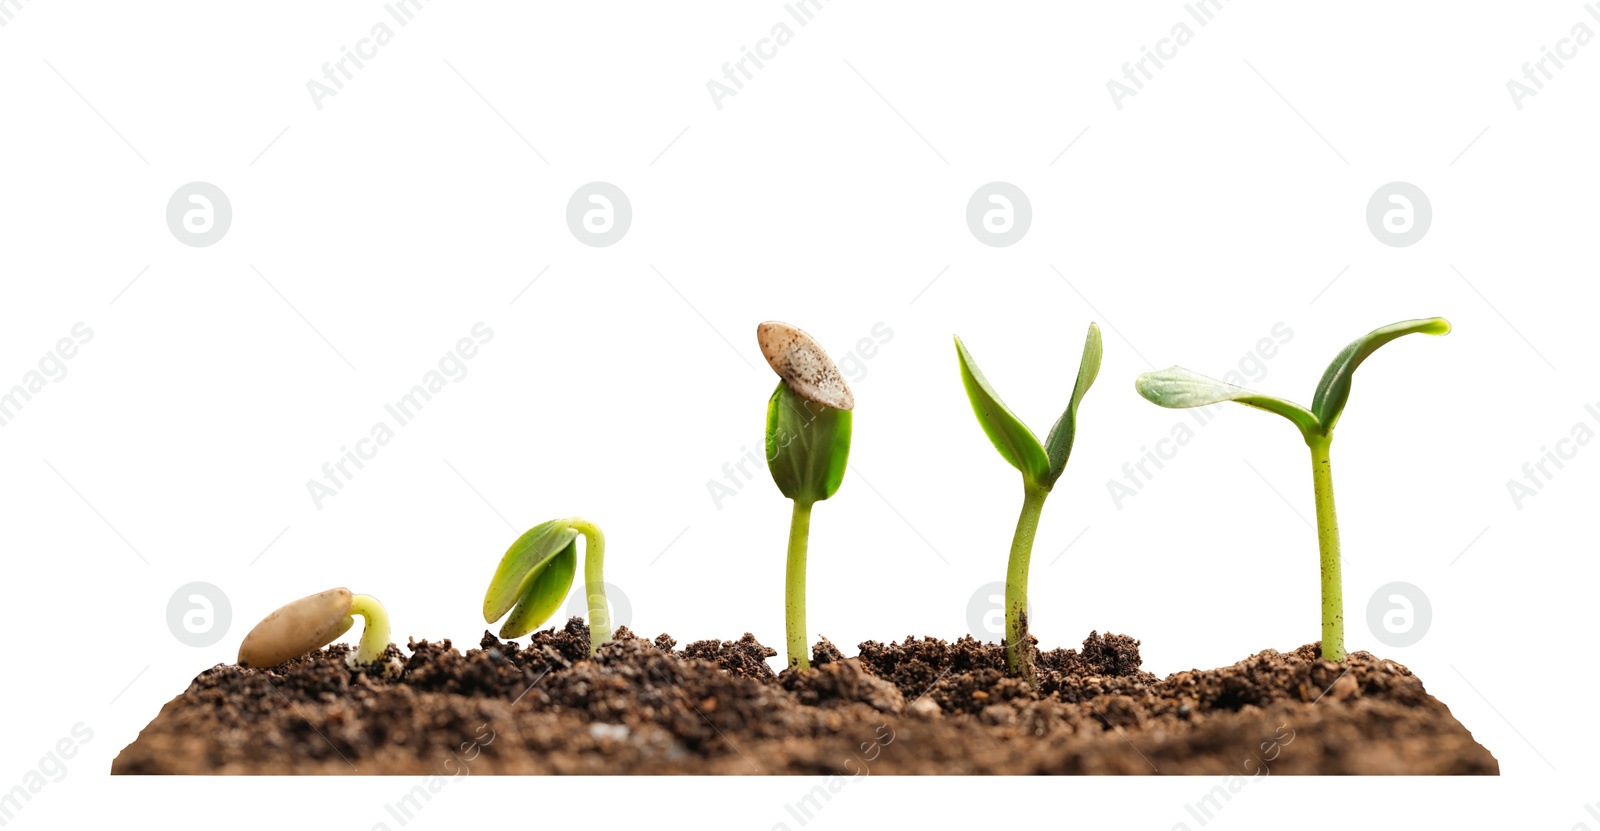 Image of Stages of growing seedling in soil on white background